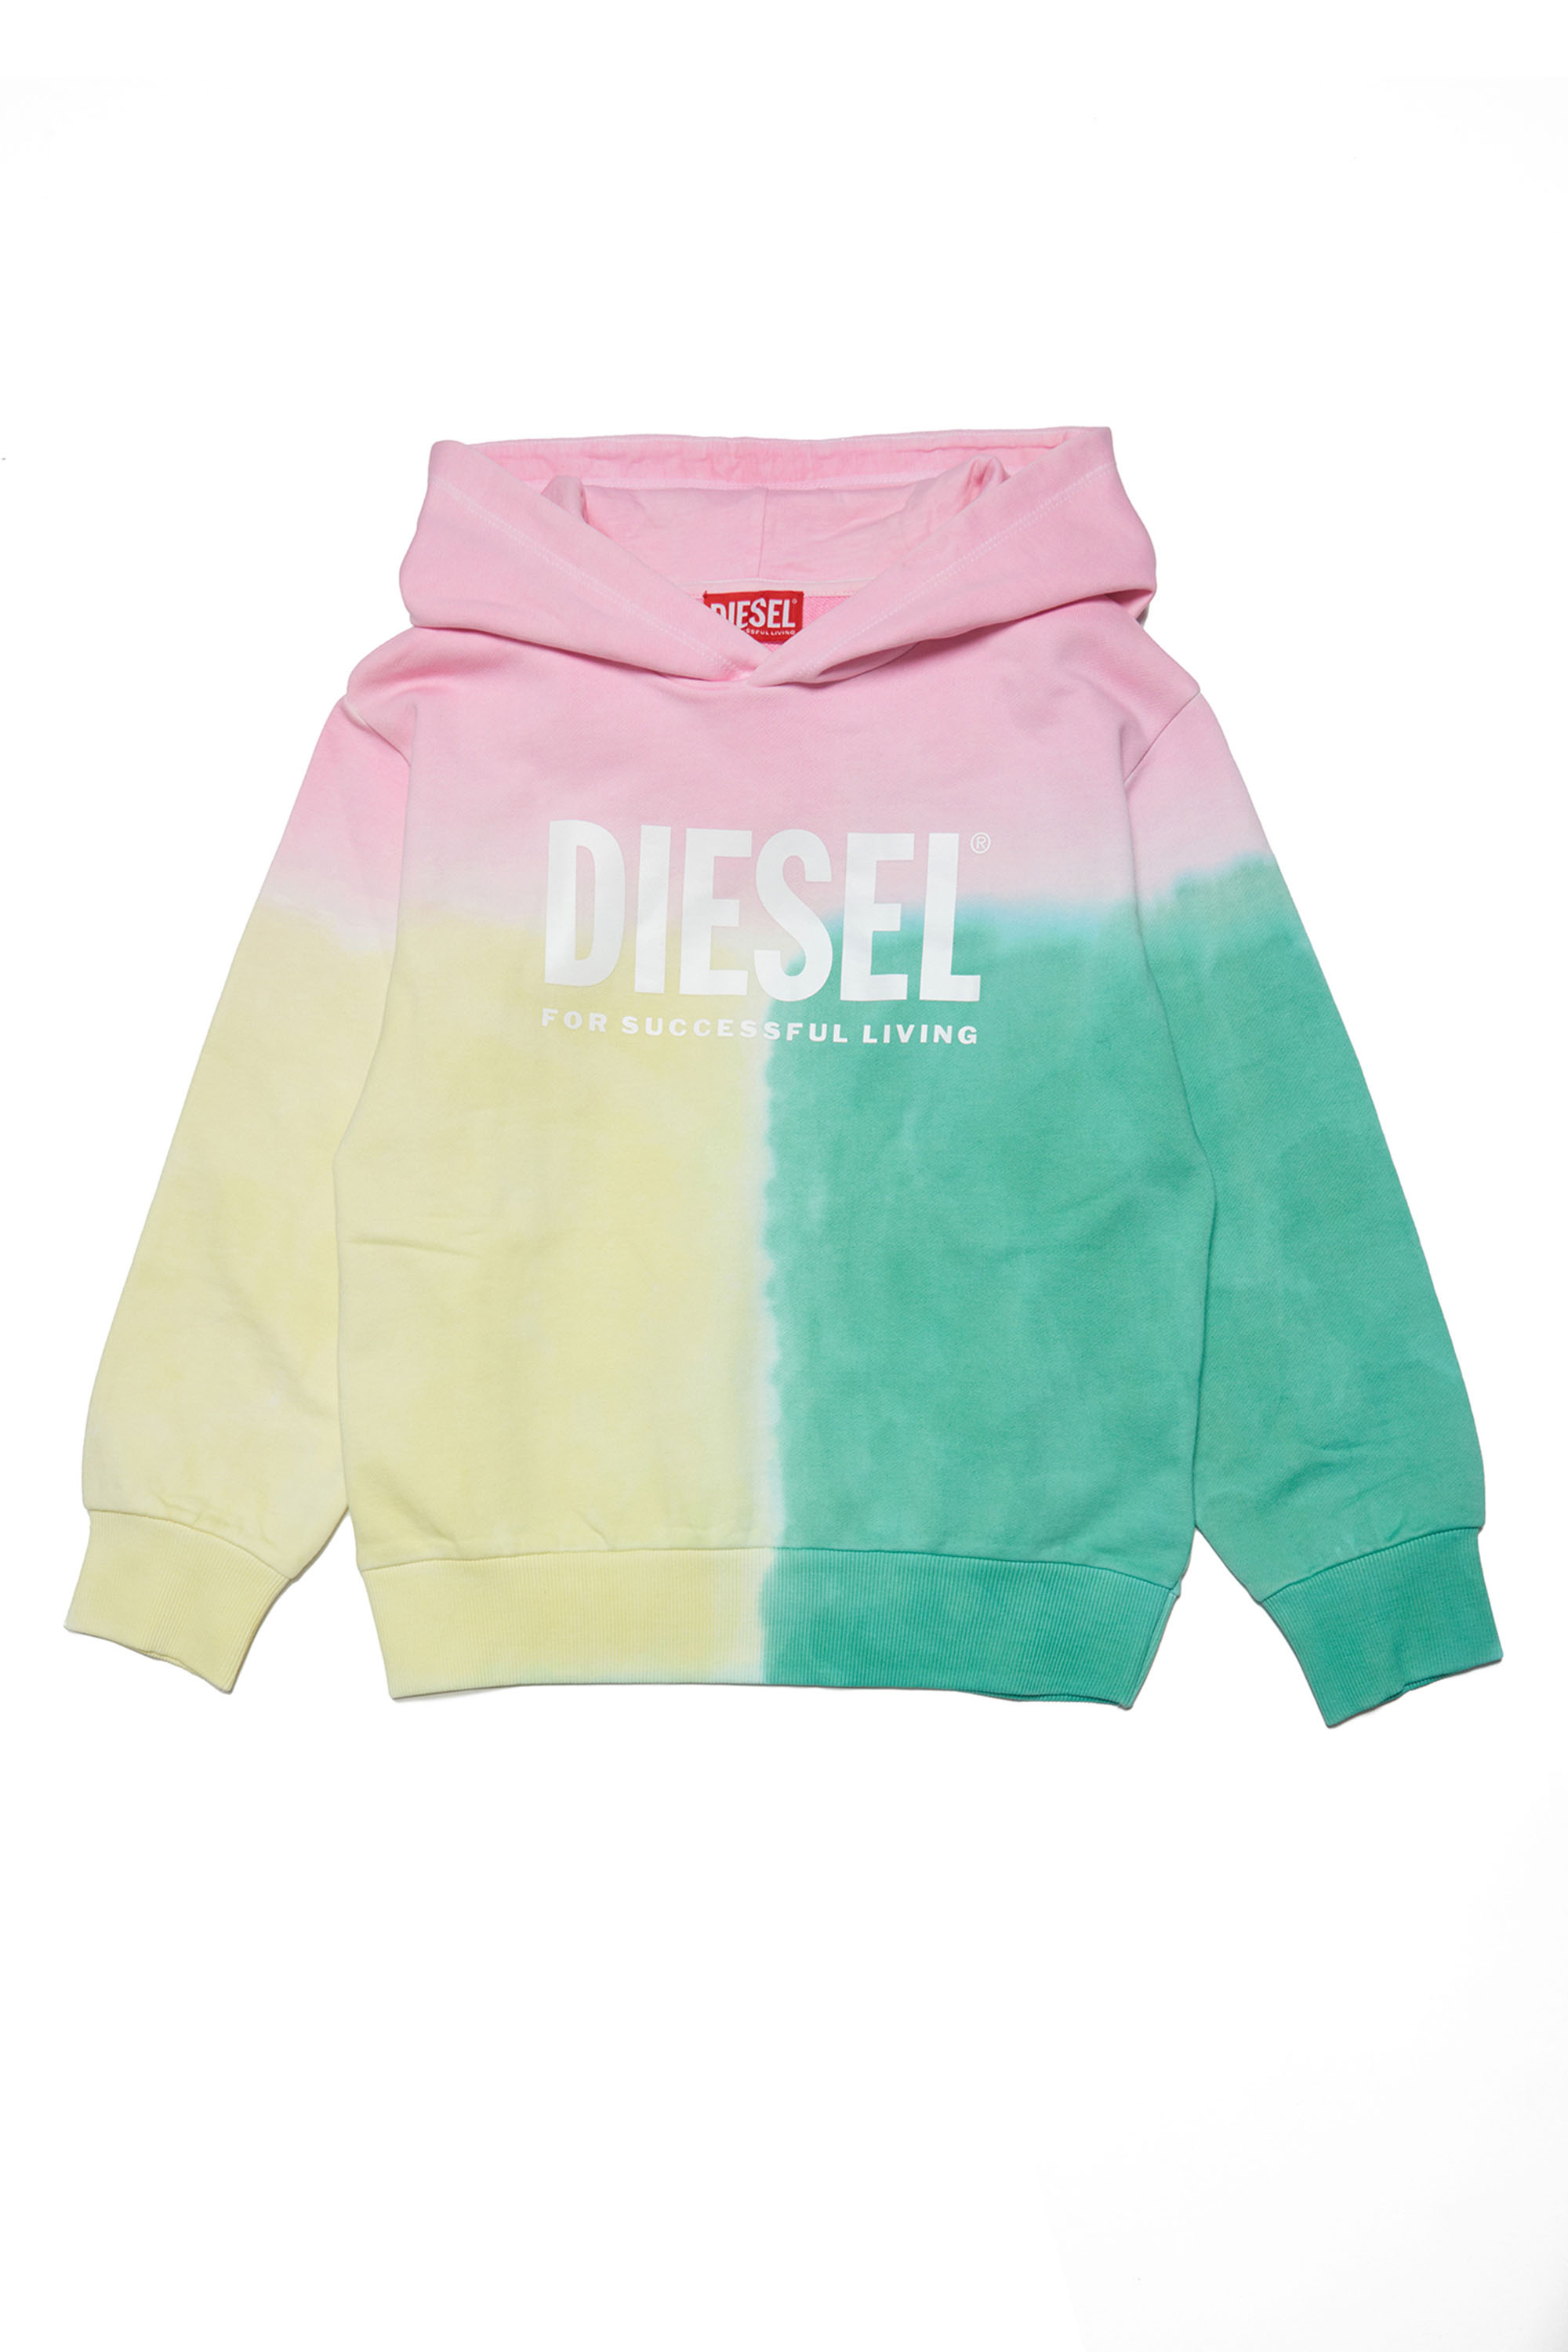 Diesel - SCORTY OVER, Pink/Green - Image 1